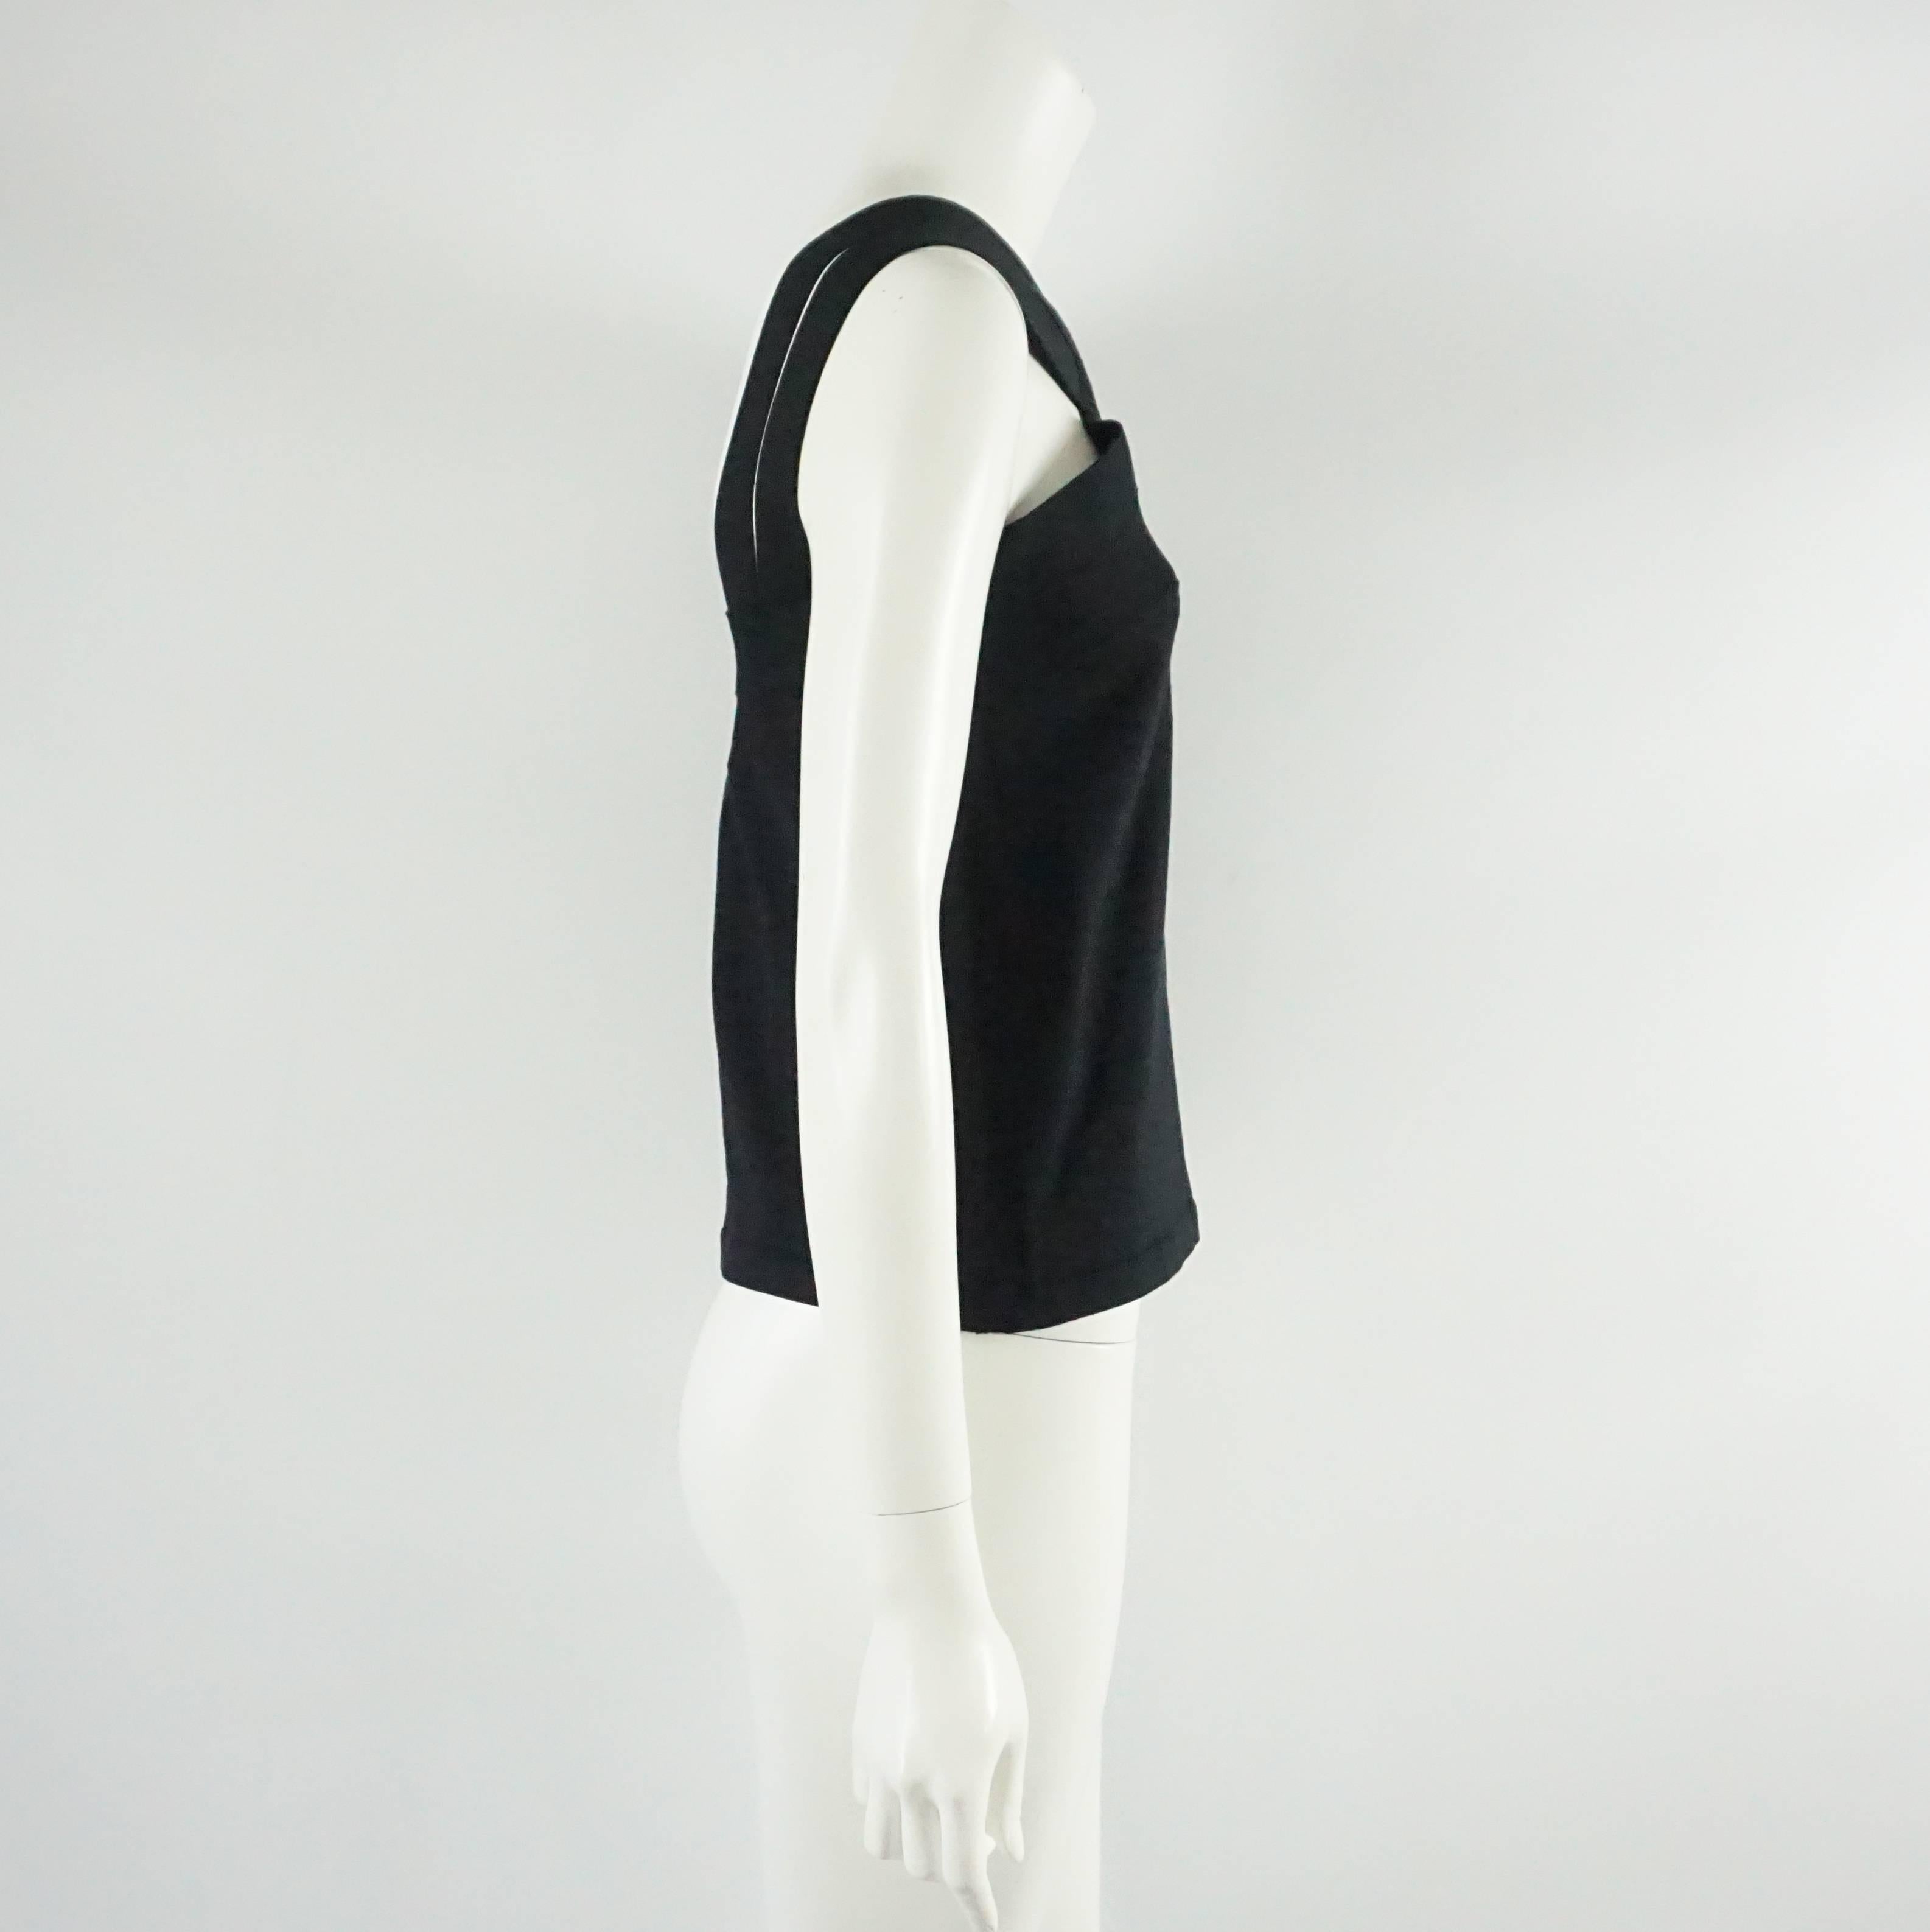 This Oscar de la Renta black knit top has a halter style neckline that come into straight straps in the back. The piece has ample stretch and is new with tags. Size L, spring 2008 collection.

Measurements
Bust: 35"
Waist: 33"
Length: